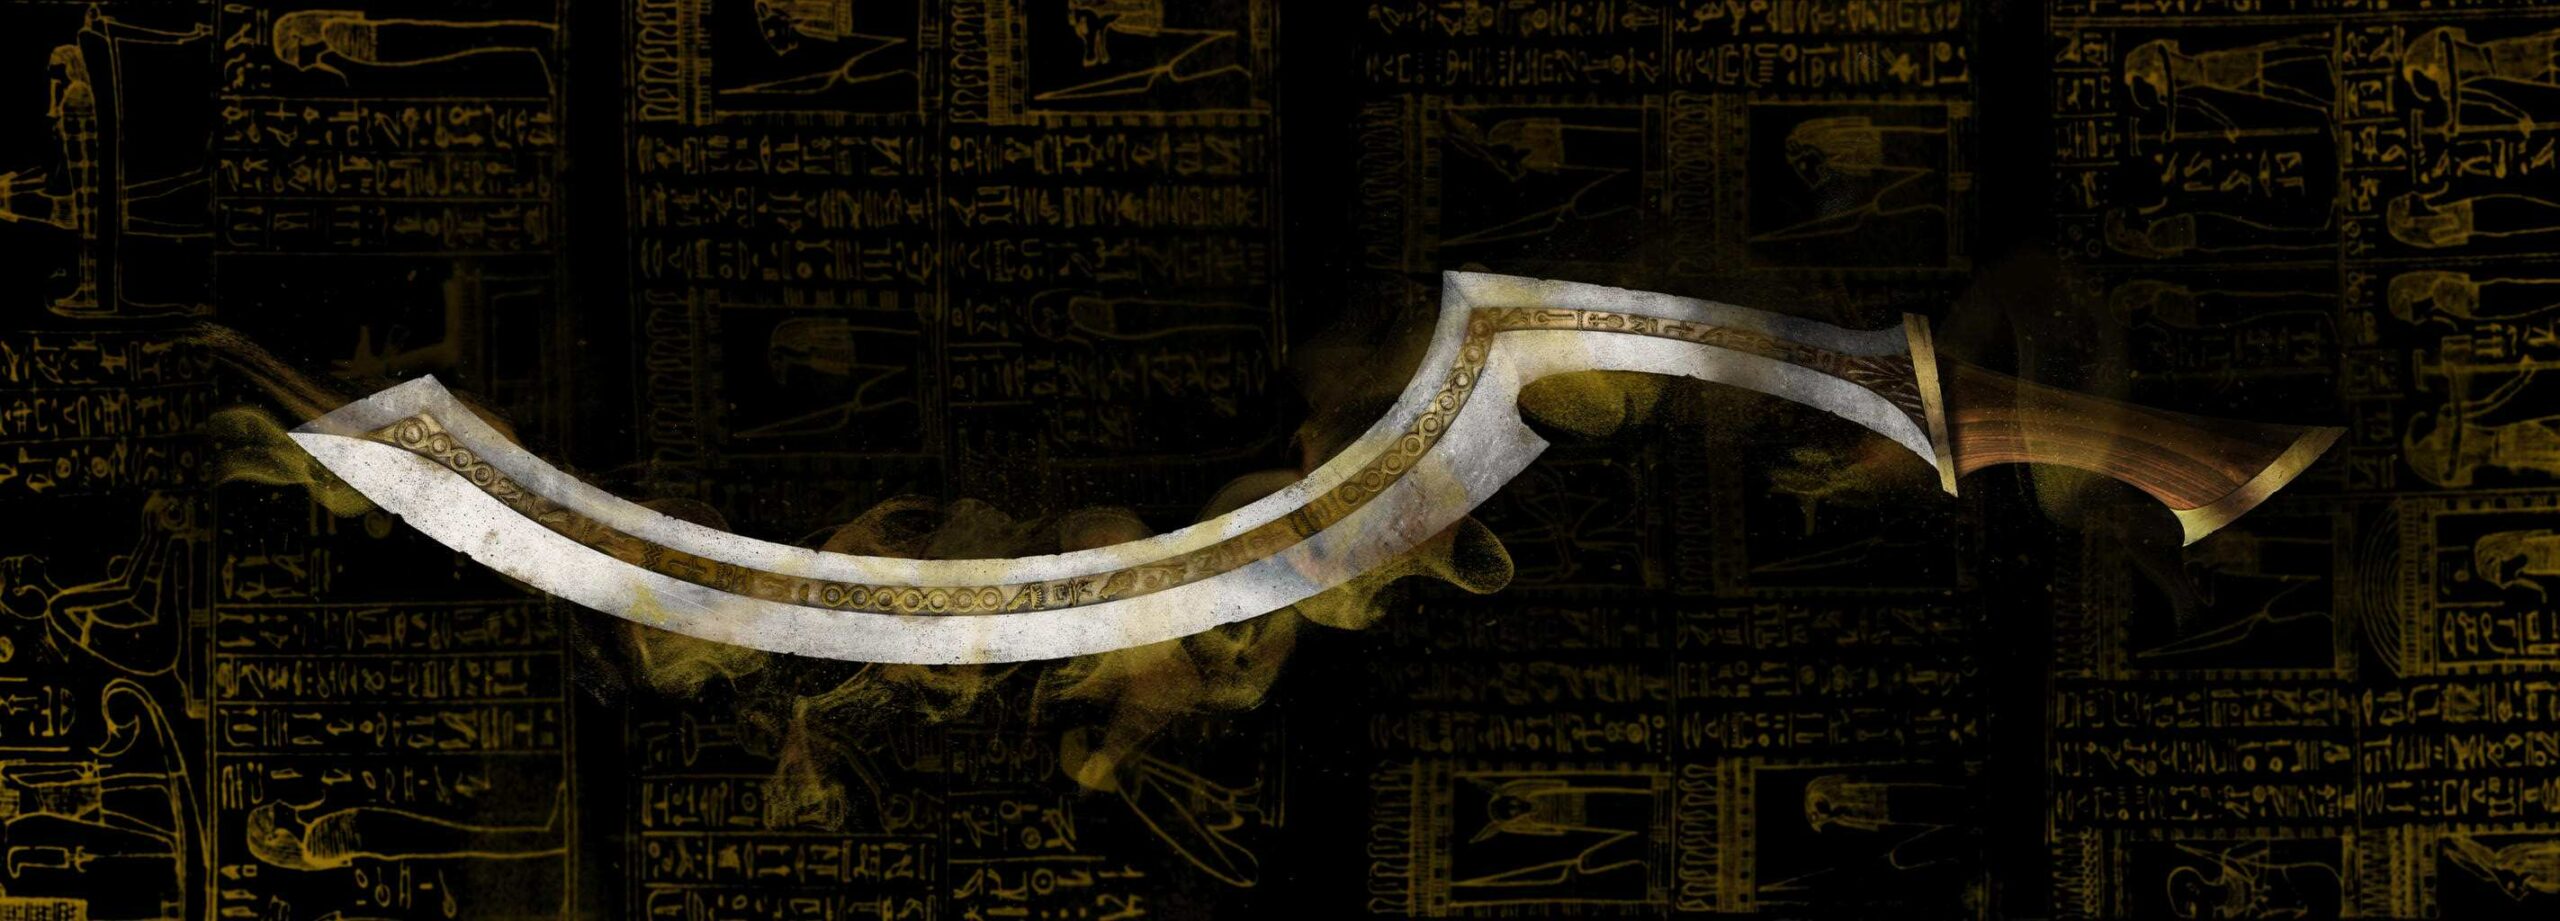 Khopesh Sword: The iconic weapon that forged the history of Ancient Egypt 3